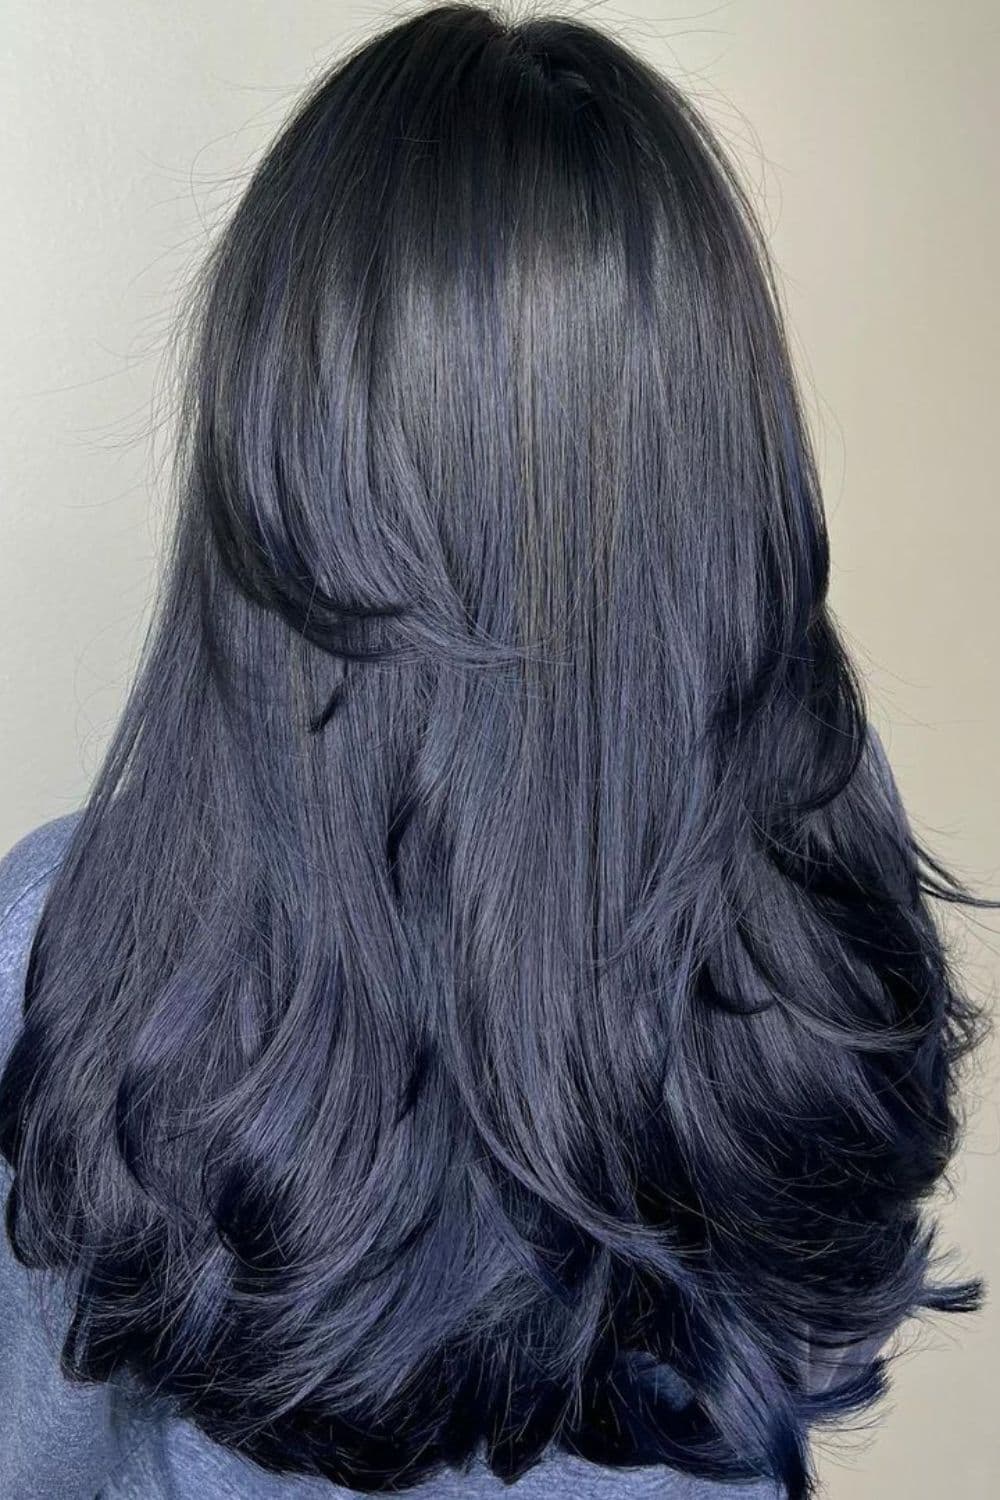 A woman with long layered midnight blue black hair.